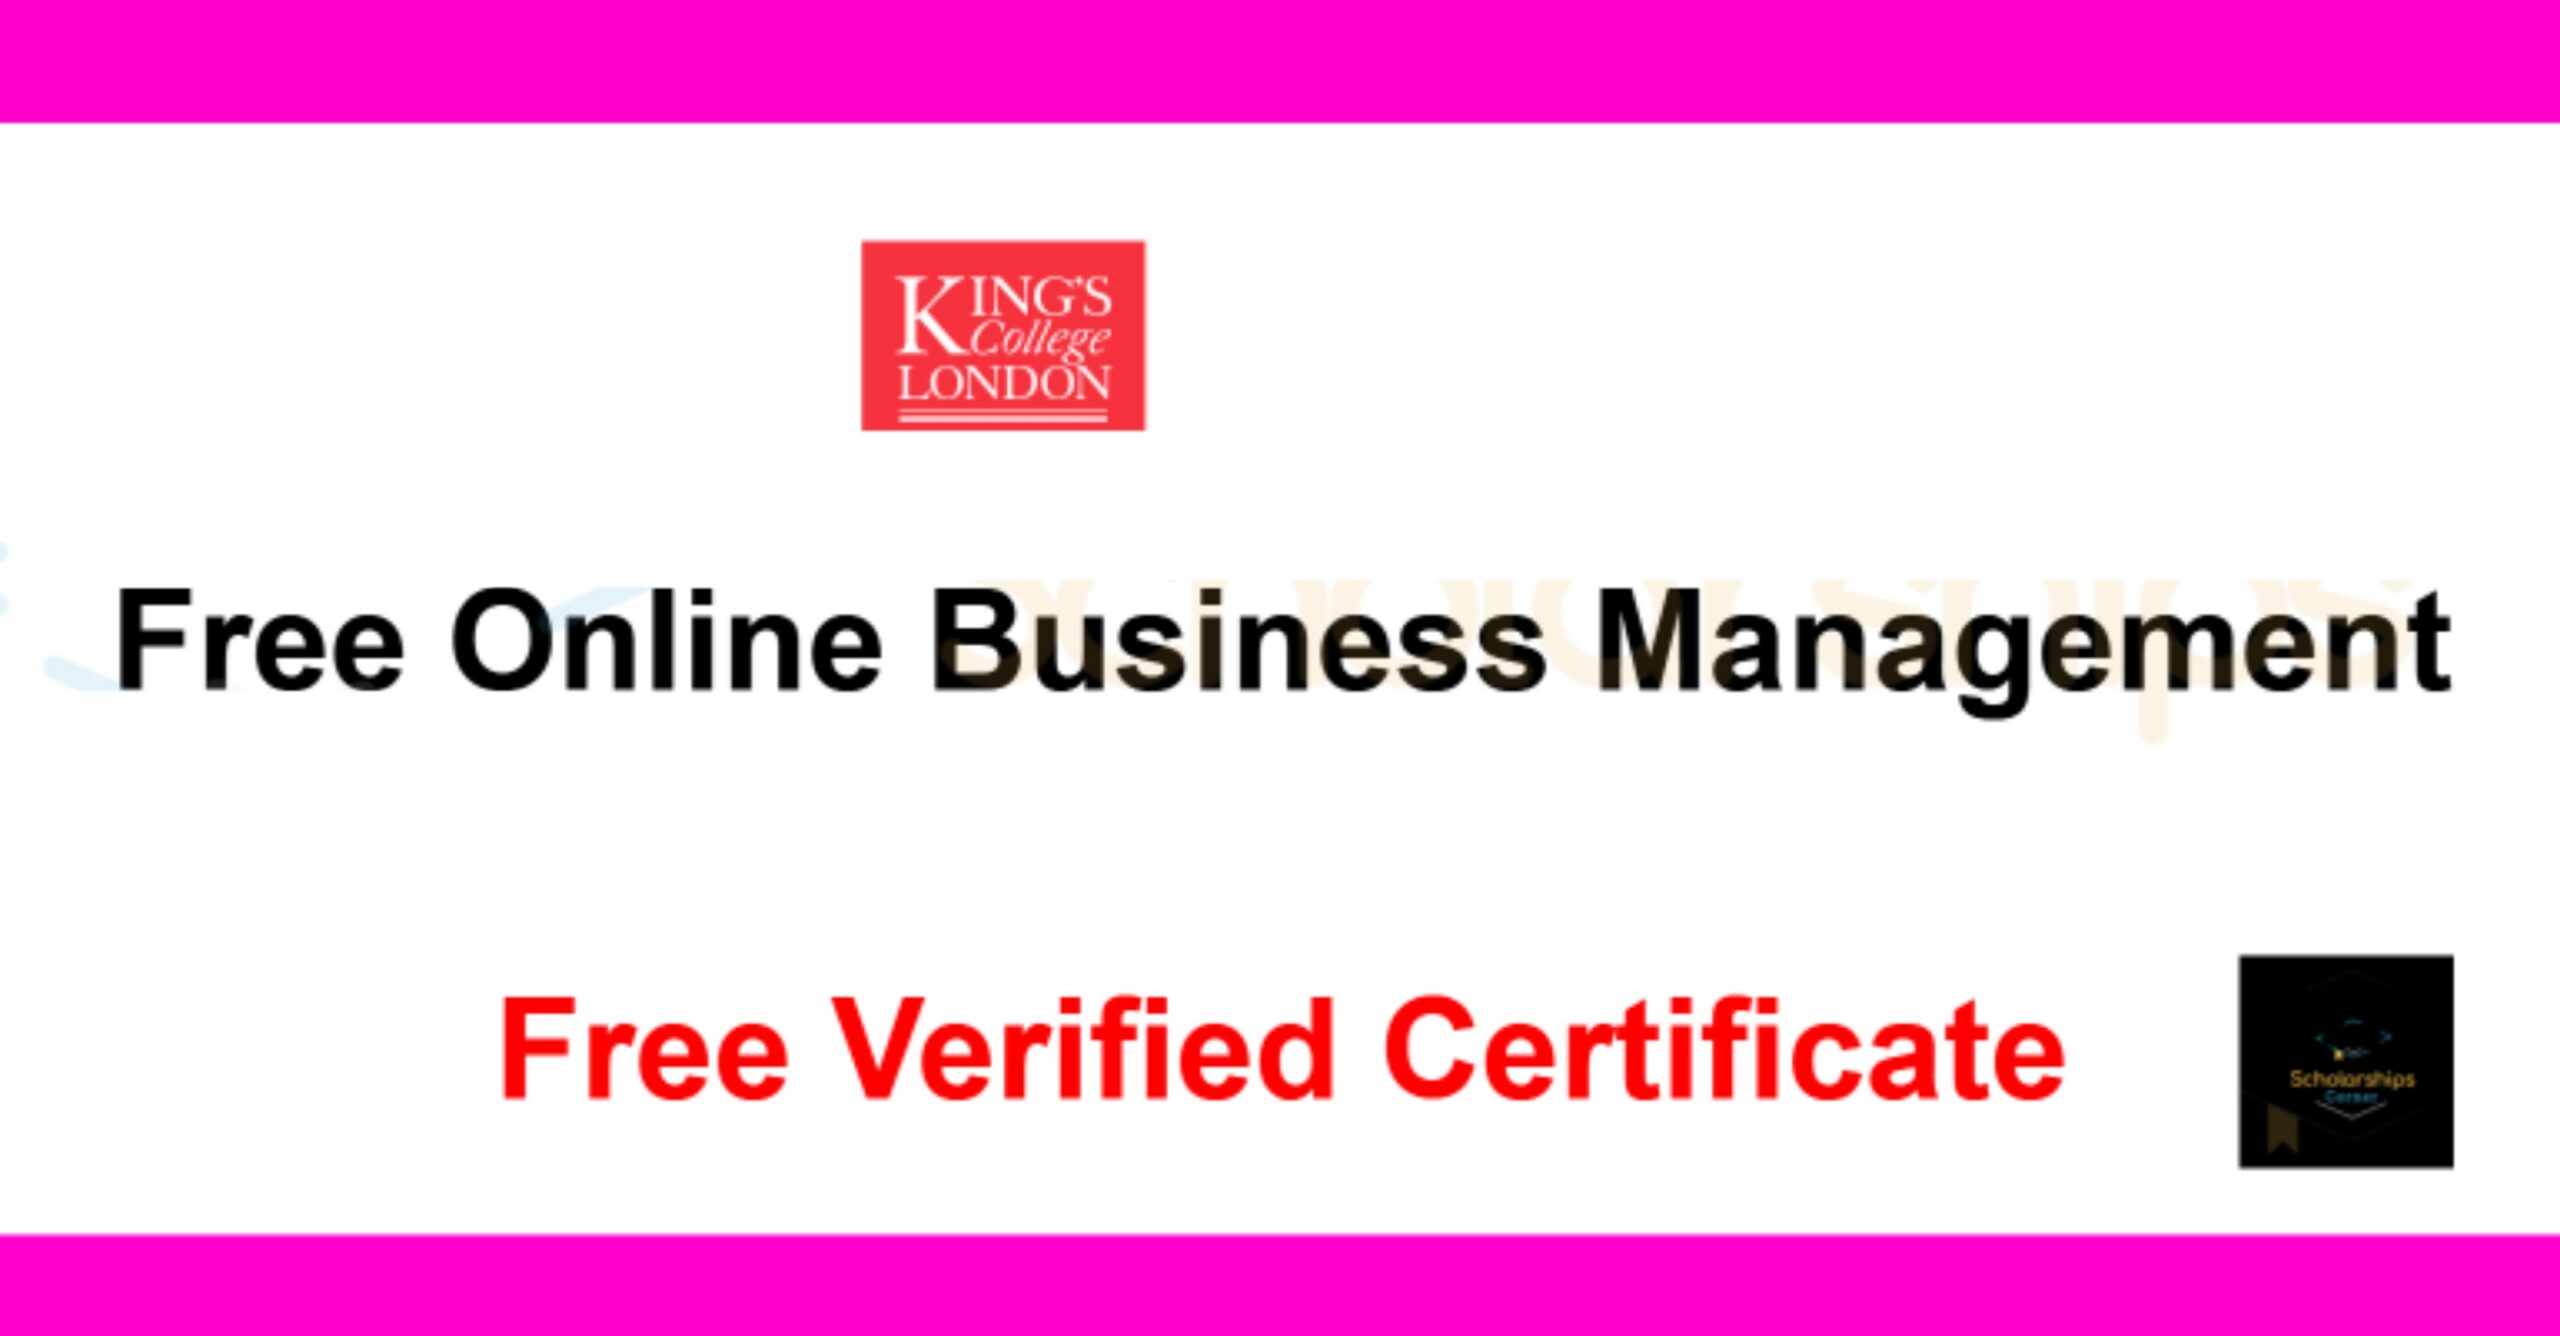 20220104 203051 scaled 1 - Kings College London Free Course and Free Certificate (100% online)